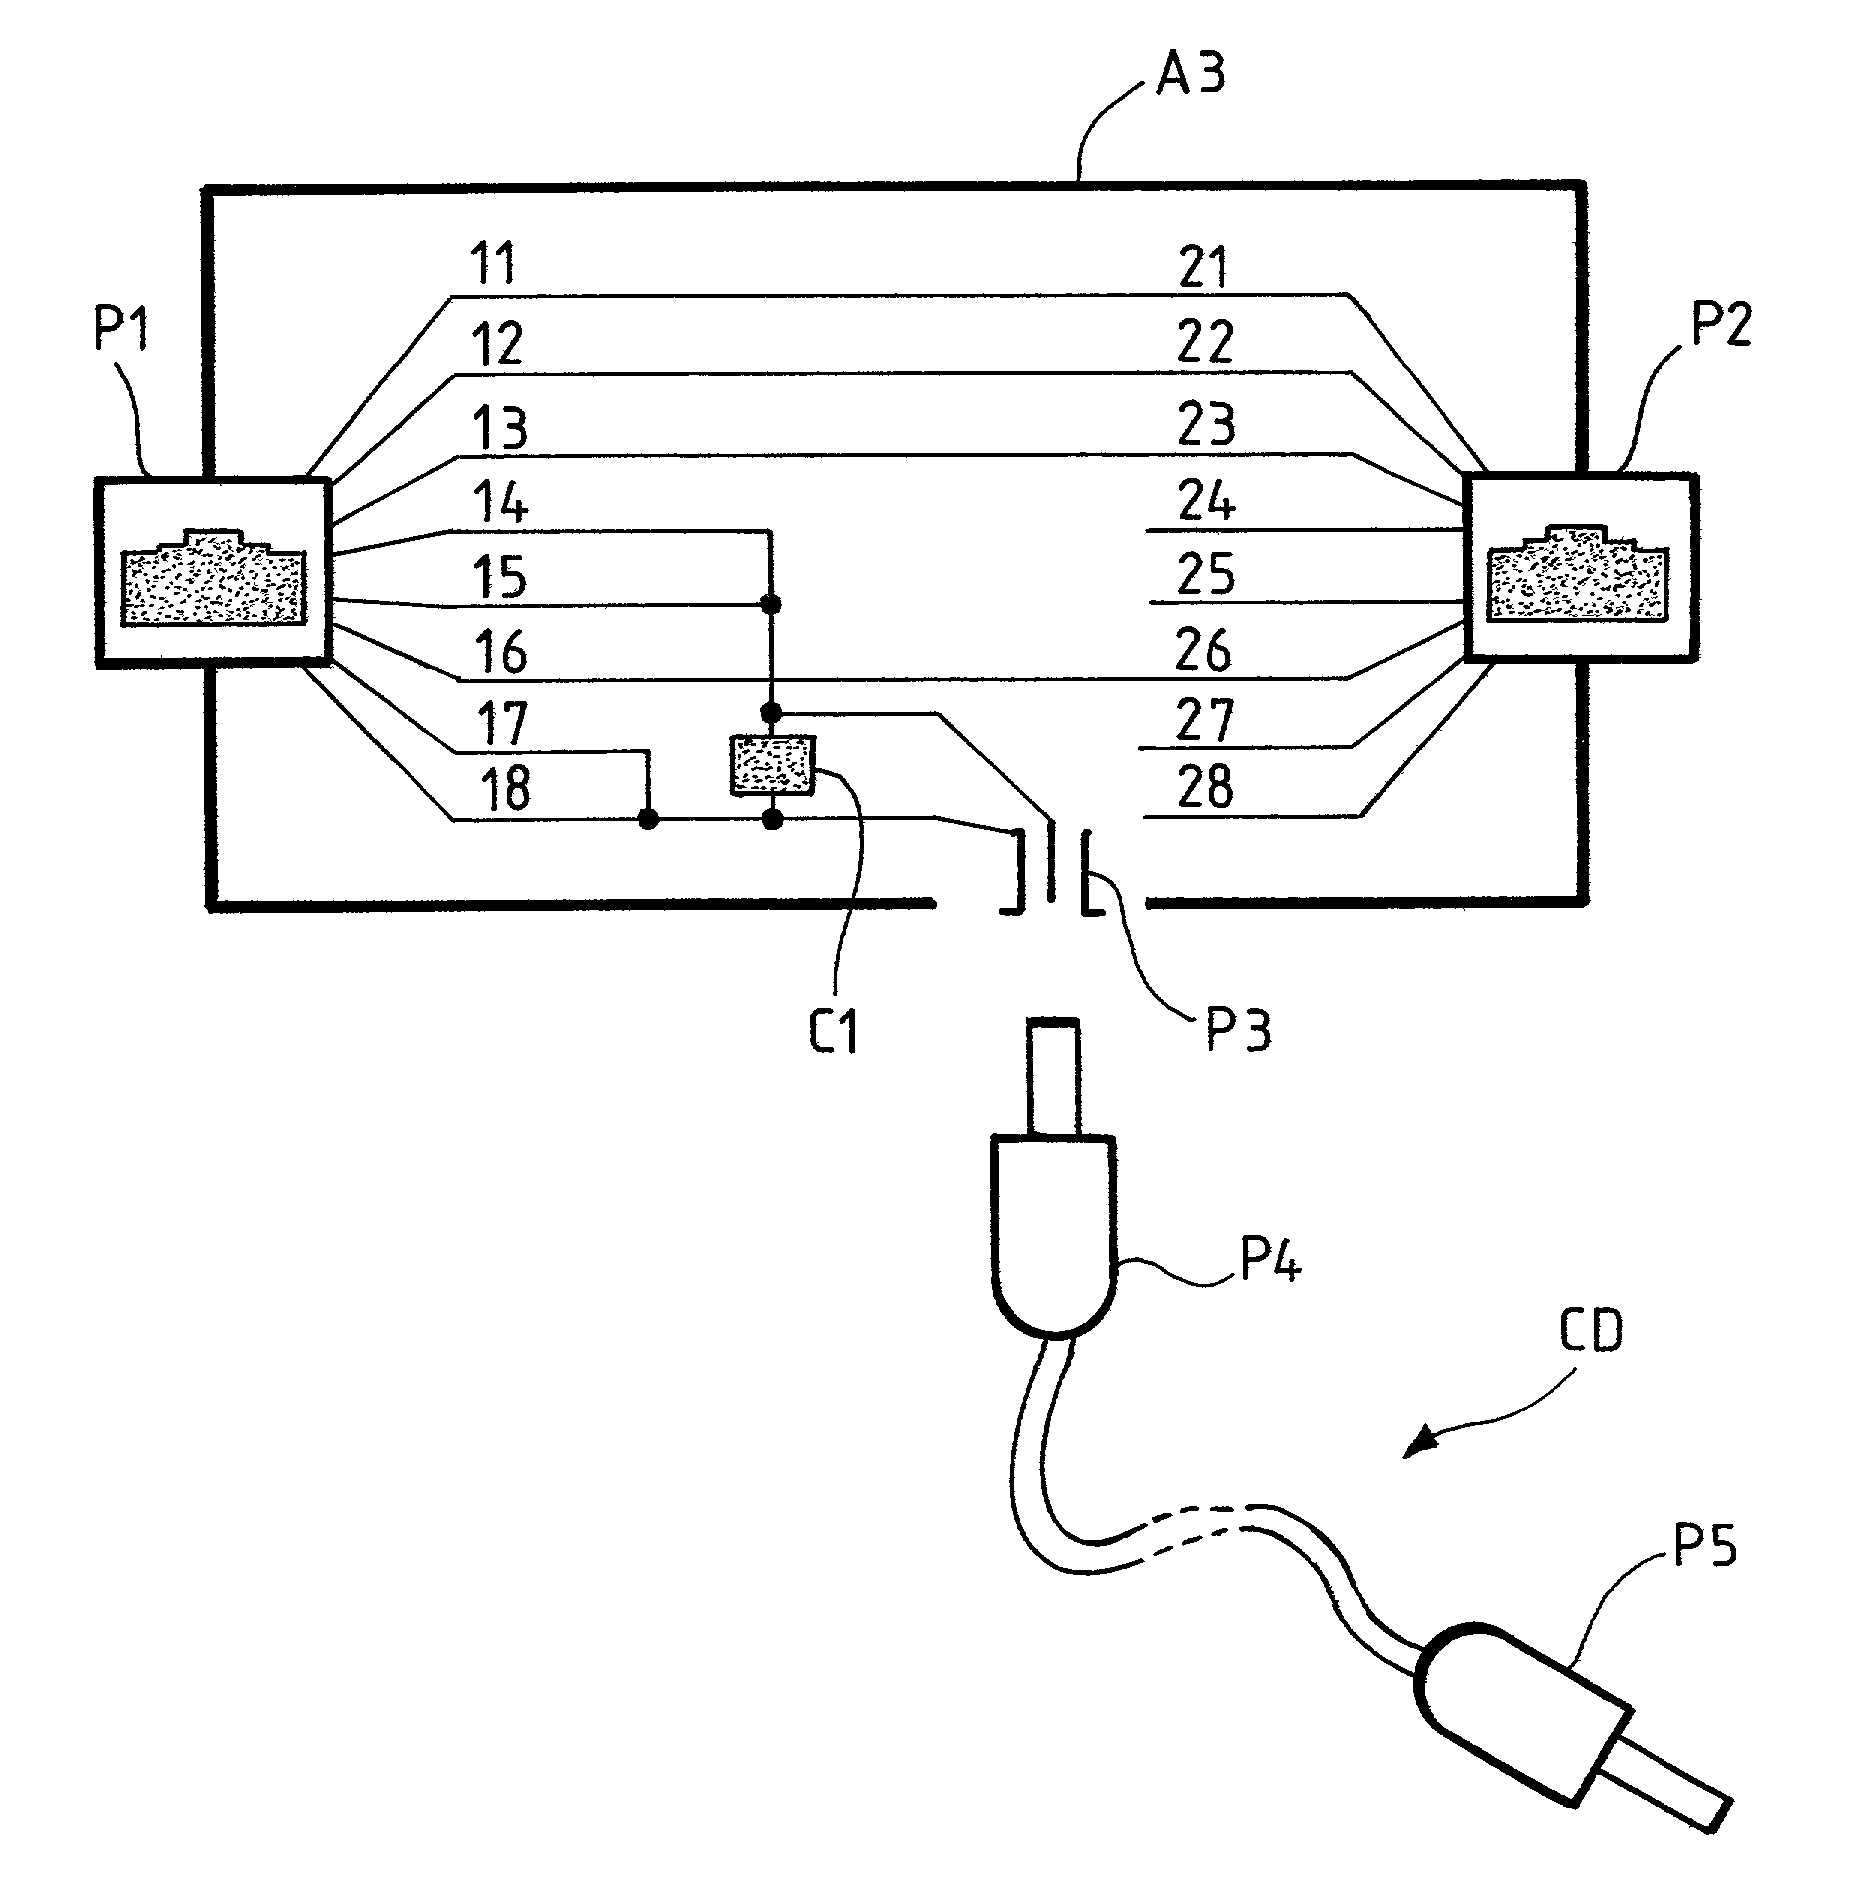 Terminal adapter for connecting a terminal to a computer local area network capable of identifying any of several terminal types